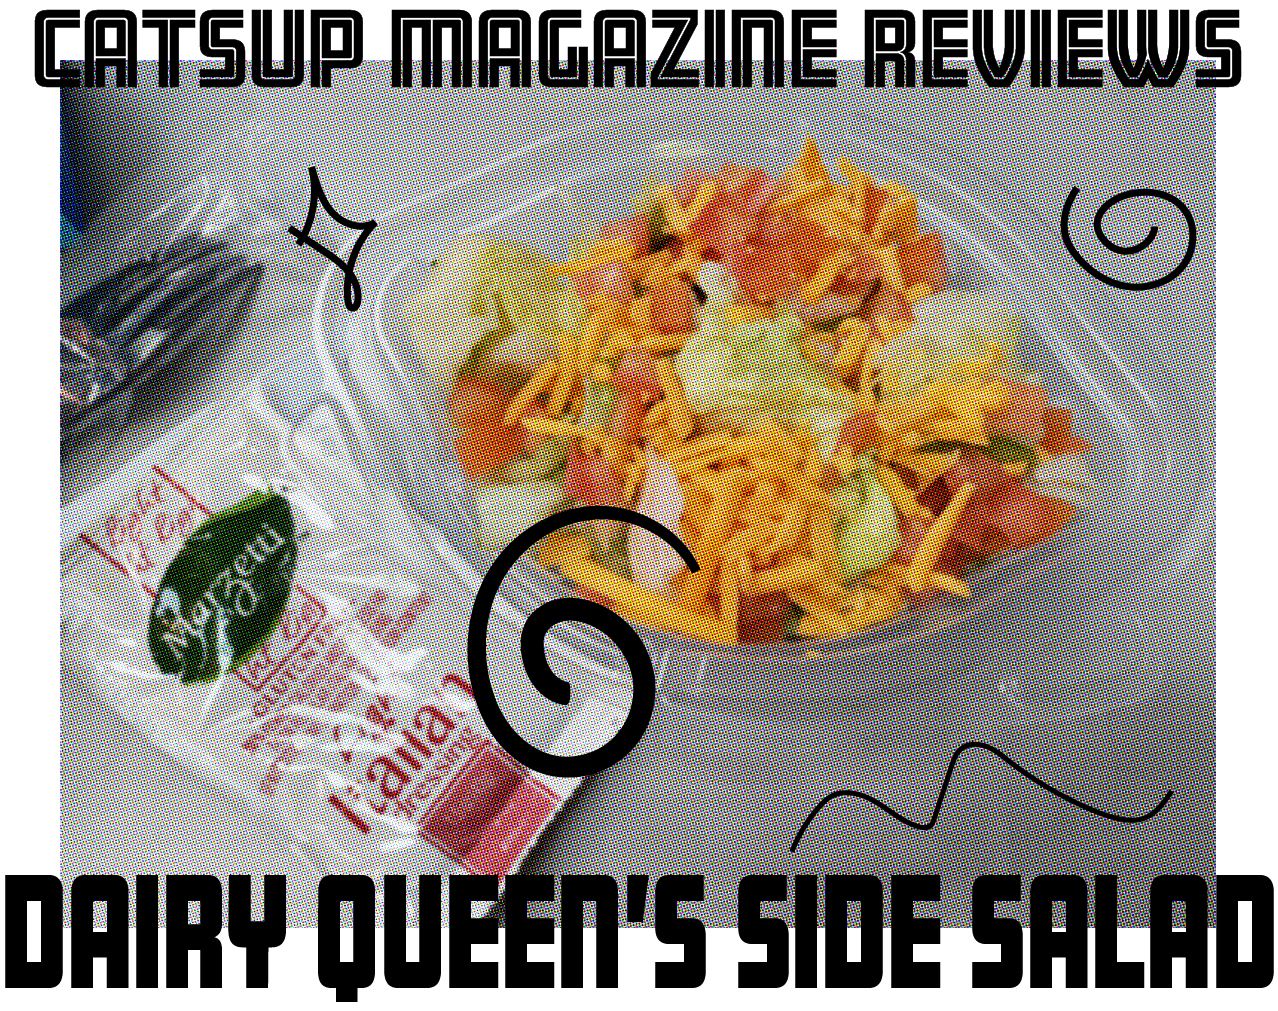 an image of a small side salad in a plastic dairy queen, eye-shaped container with an italian sauce packet to the left and a plastic fork can be seen to the side. the text overlaying reads: 'catsup magazine reviews' on the top and on the bottom it says, 'dairy queen's side salad'